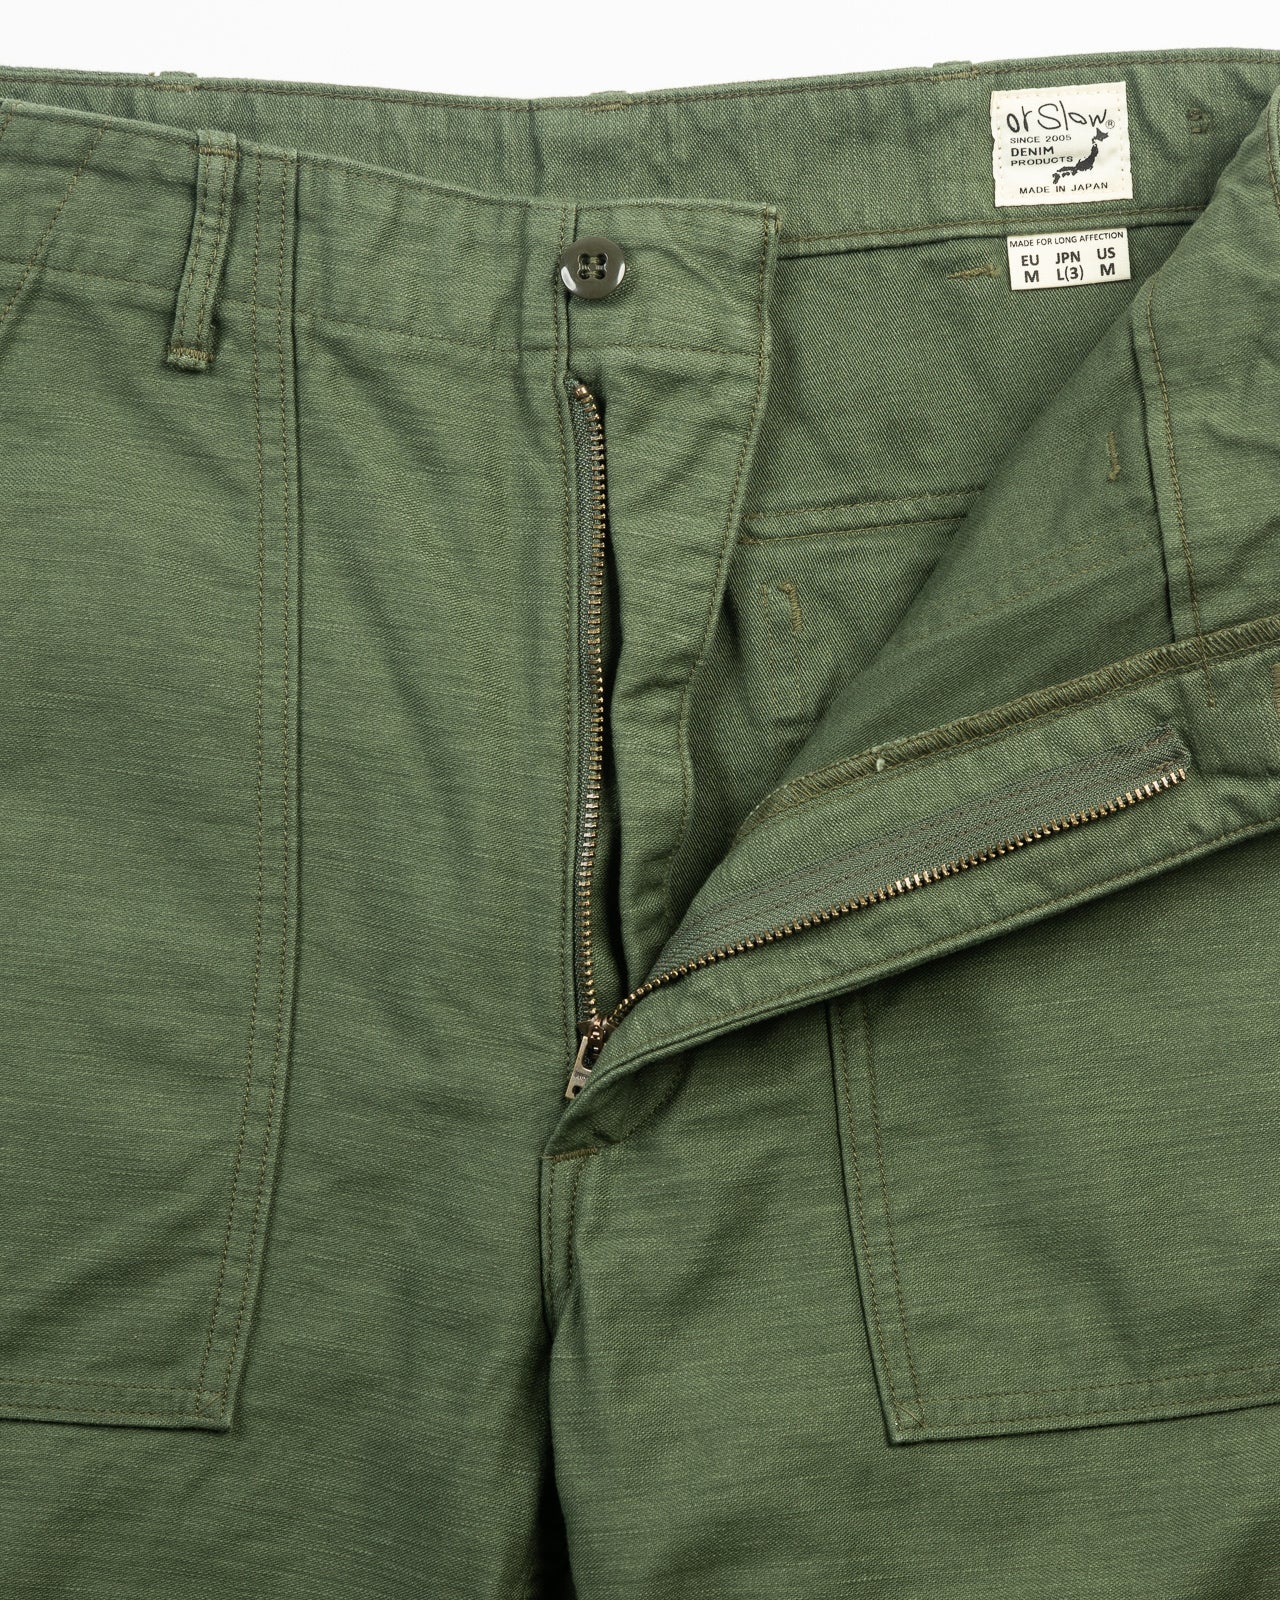 subculture FATIGUE PANTS SHORTS 3 キムタク-